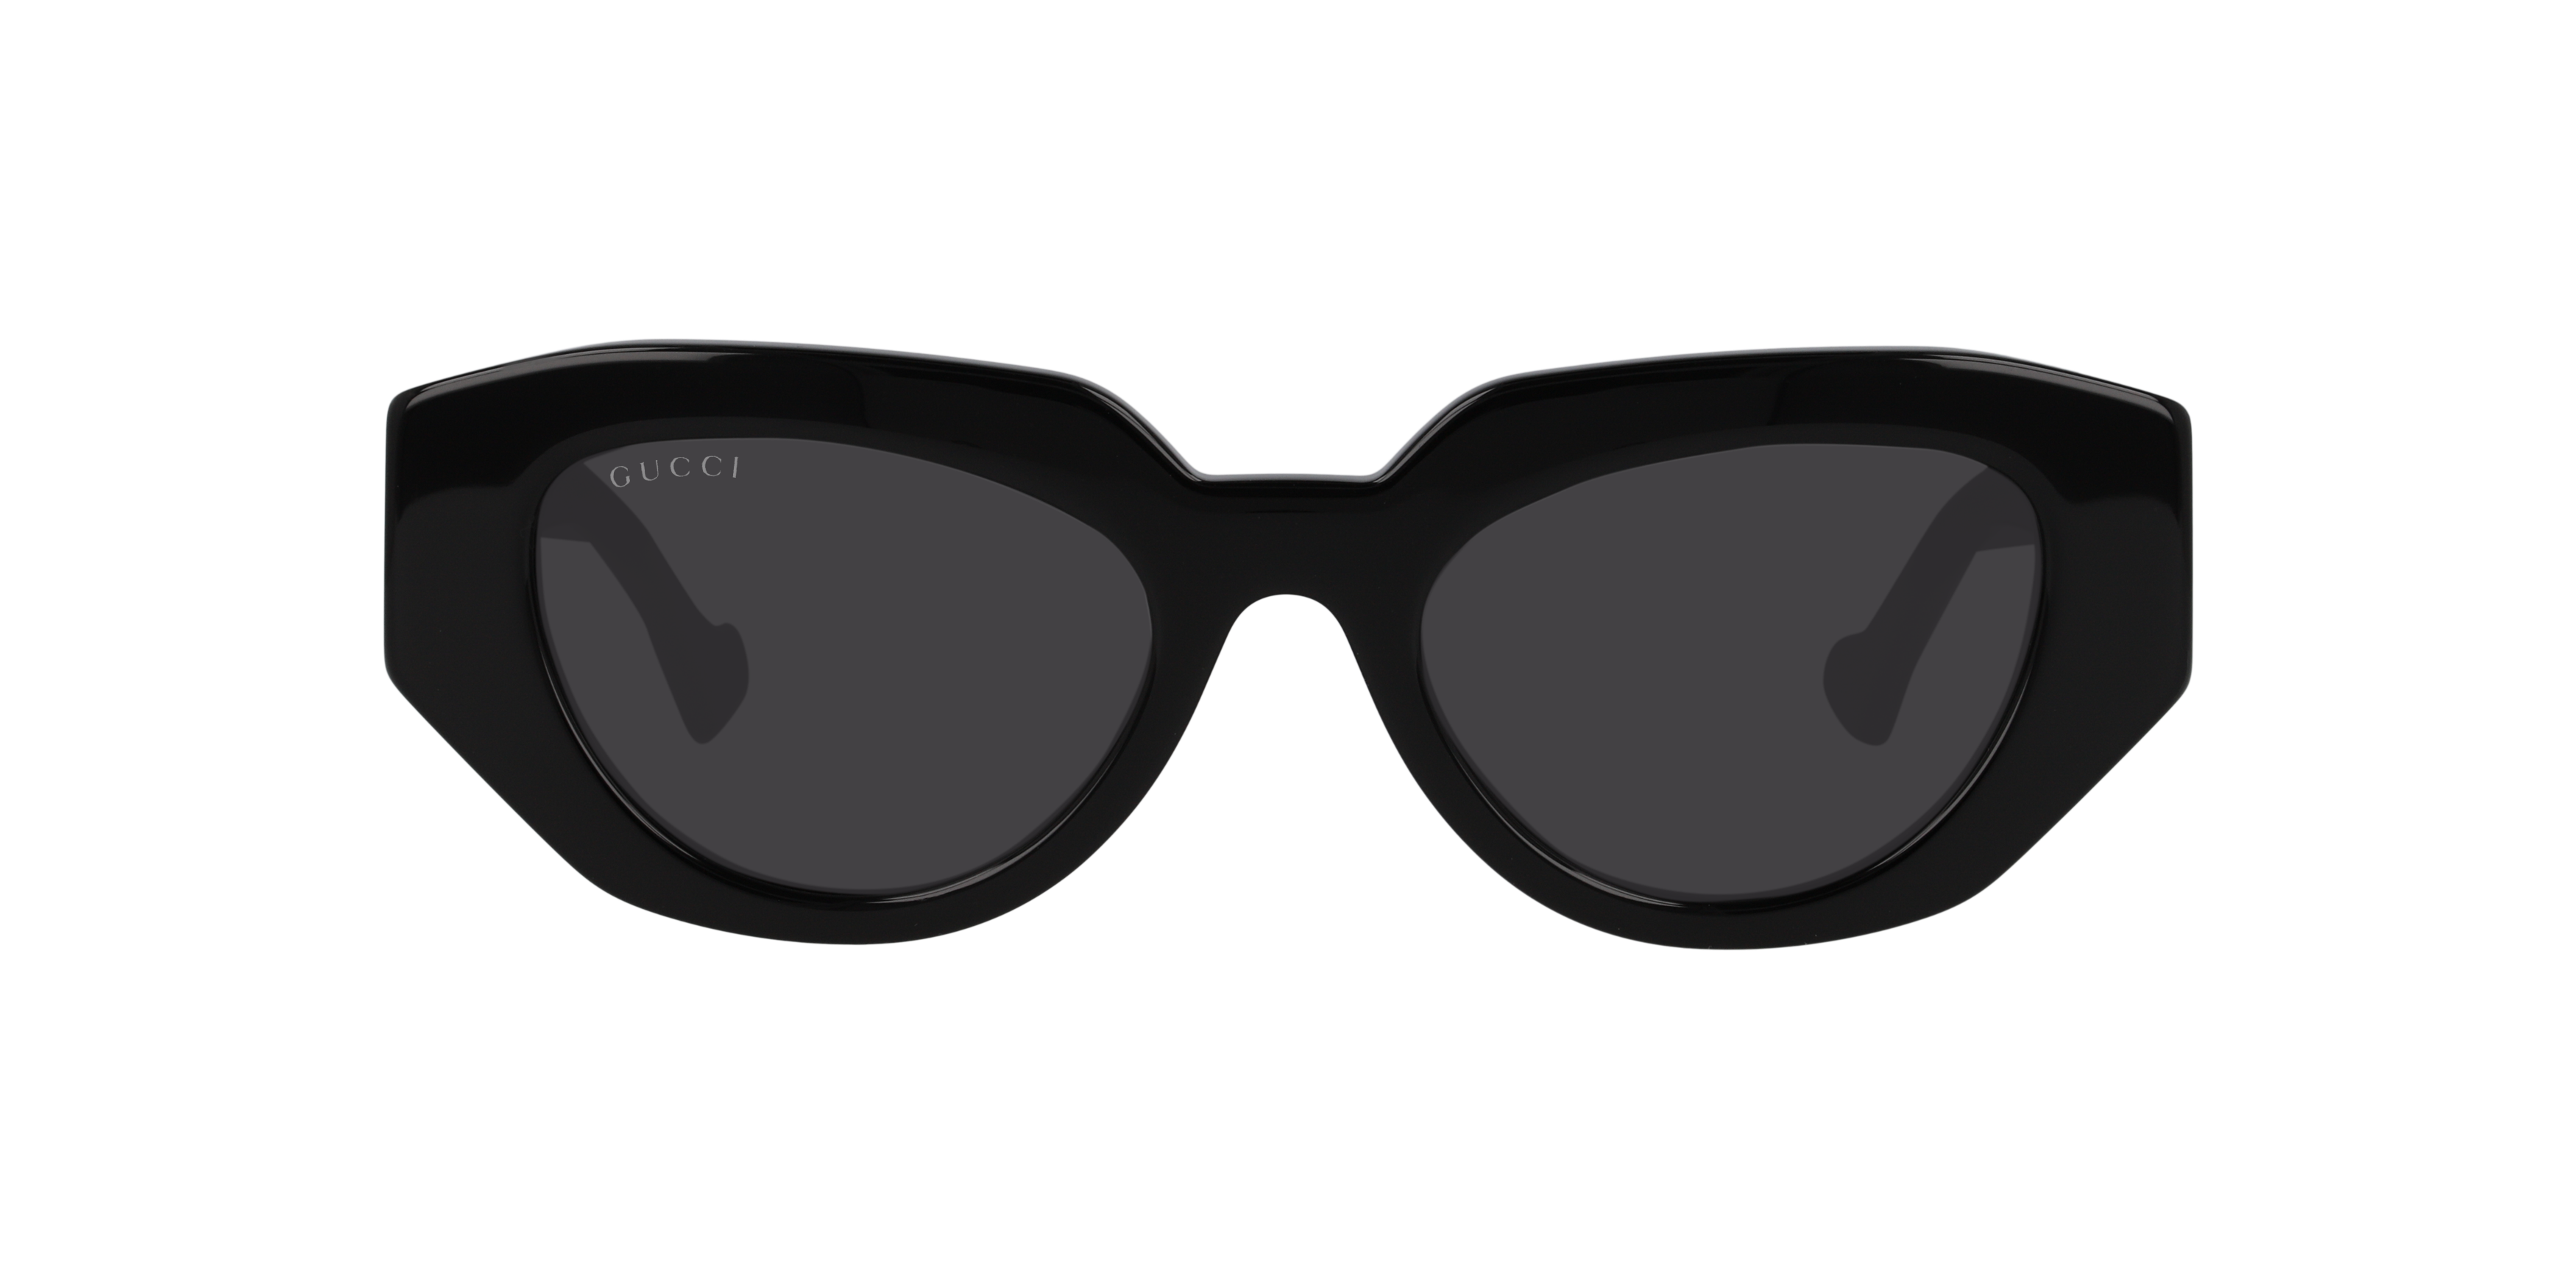 [products.image.front] Gucci GG 1421S Sunglasses